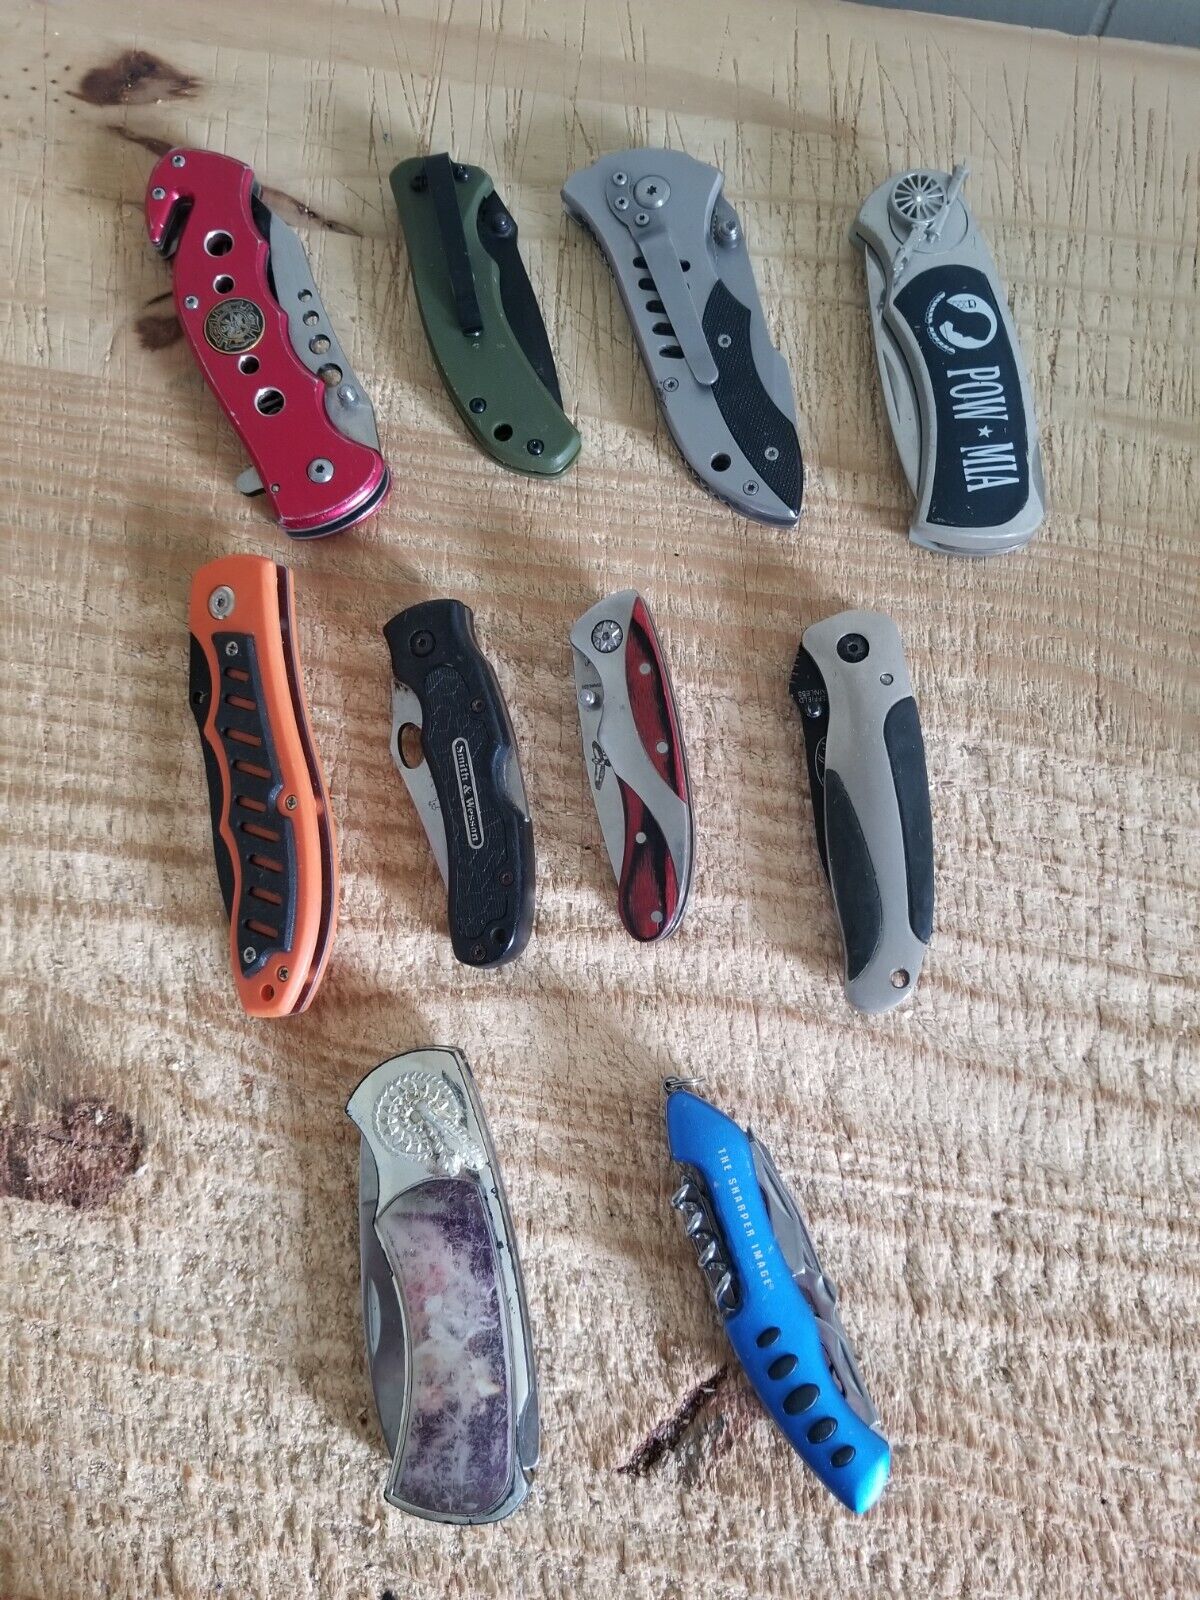 NICE VARIETY OF BETTER VINTAGE POCKET KNIVES.FREE SHIPPING INCLUDED